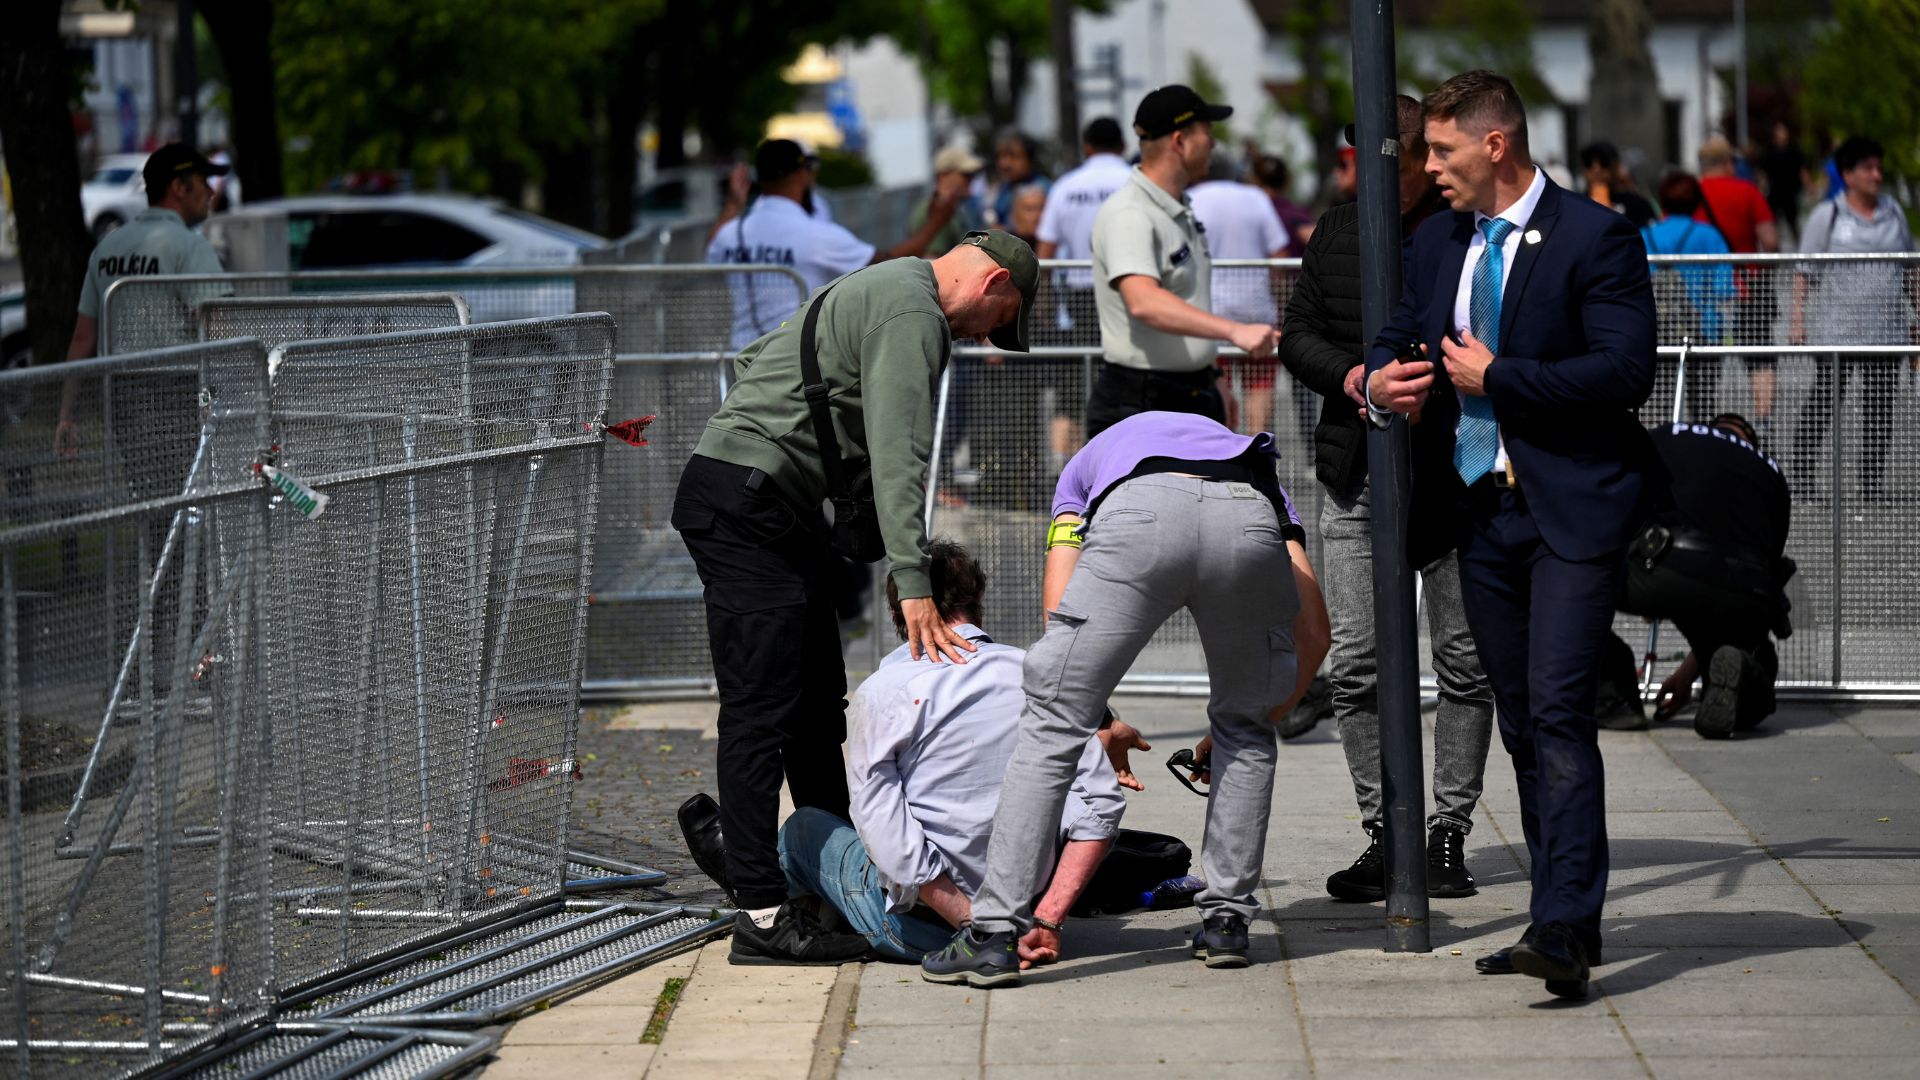 A man is detained after the shooting of Slovak PM Robert Fico. /Radovan Stoklasa/Reuters